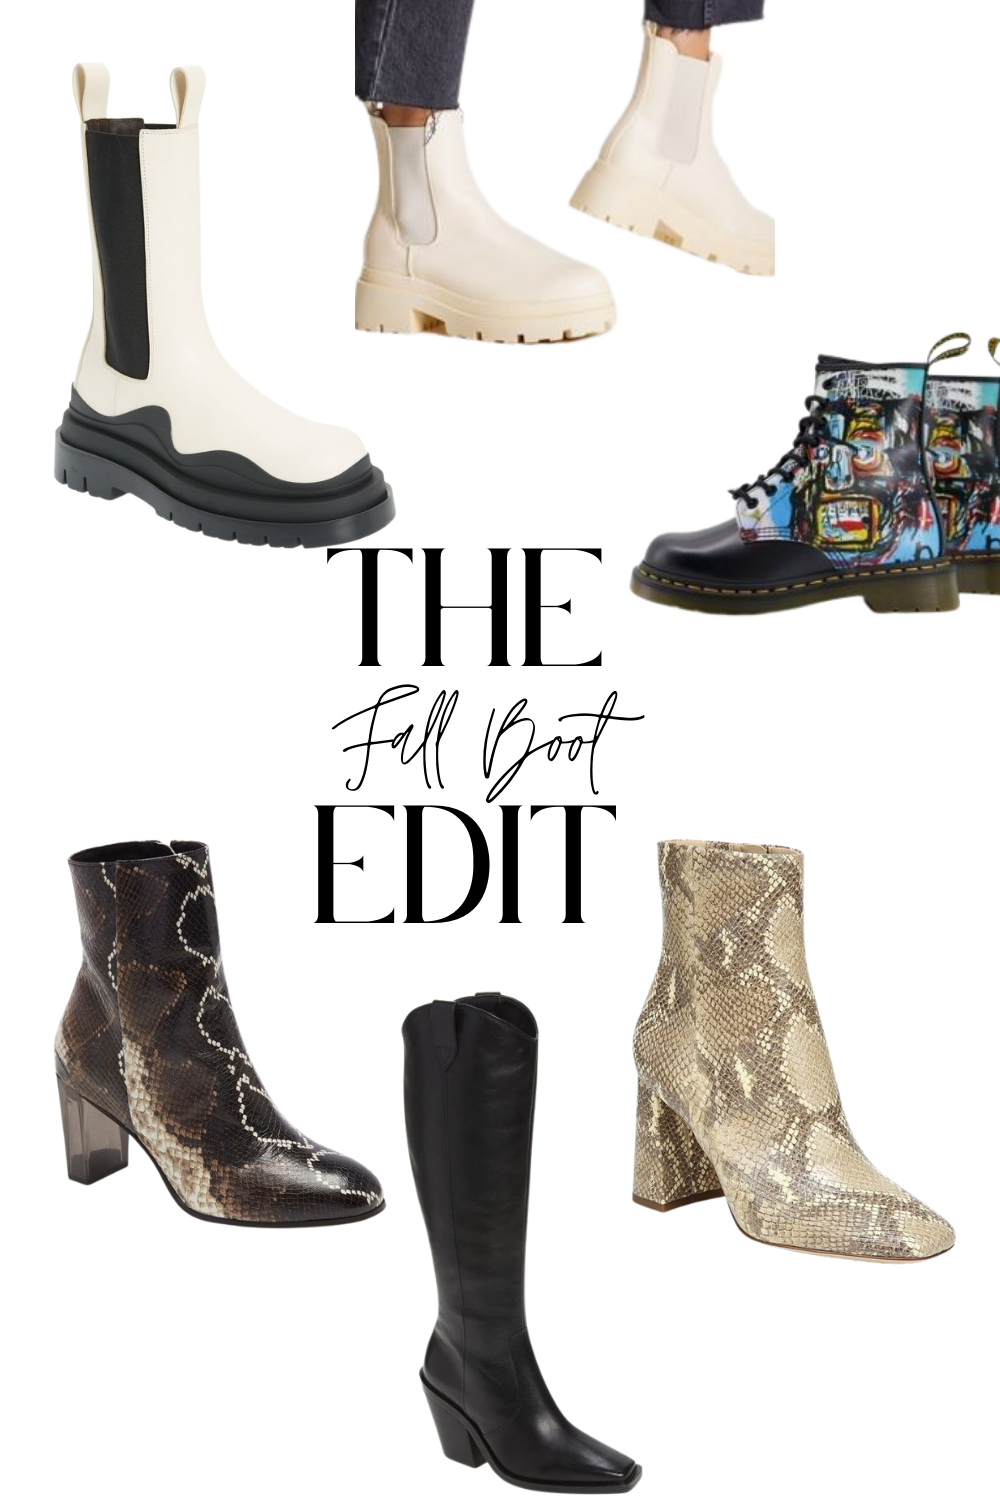 21 Pairs of Boots You Need to Buy for Fall